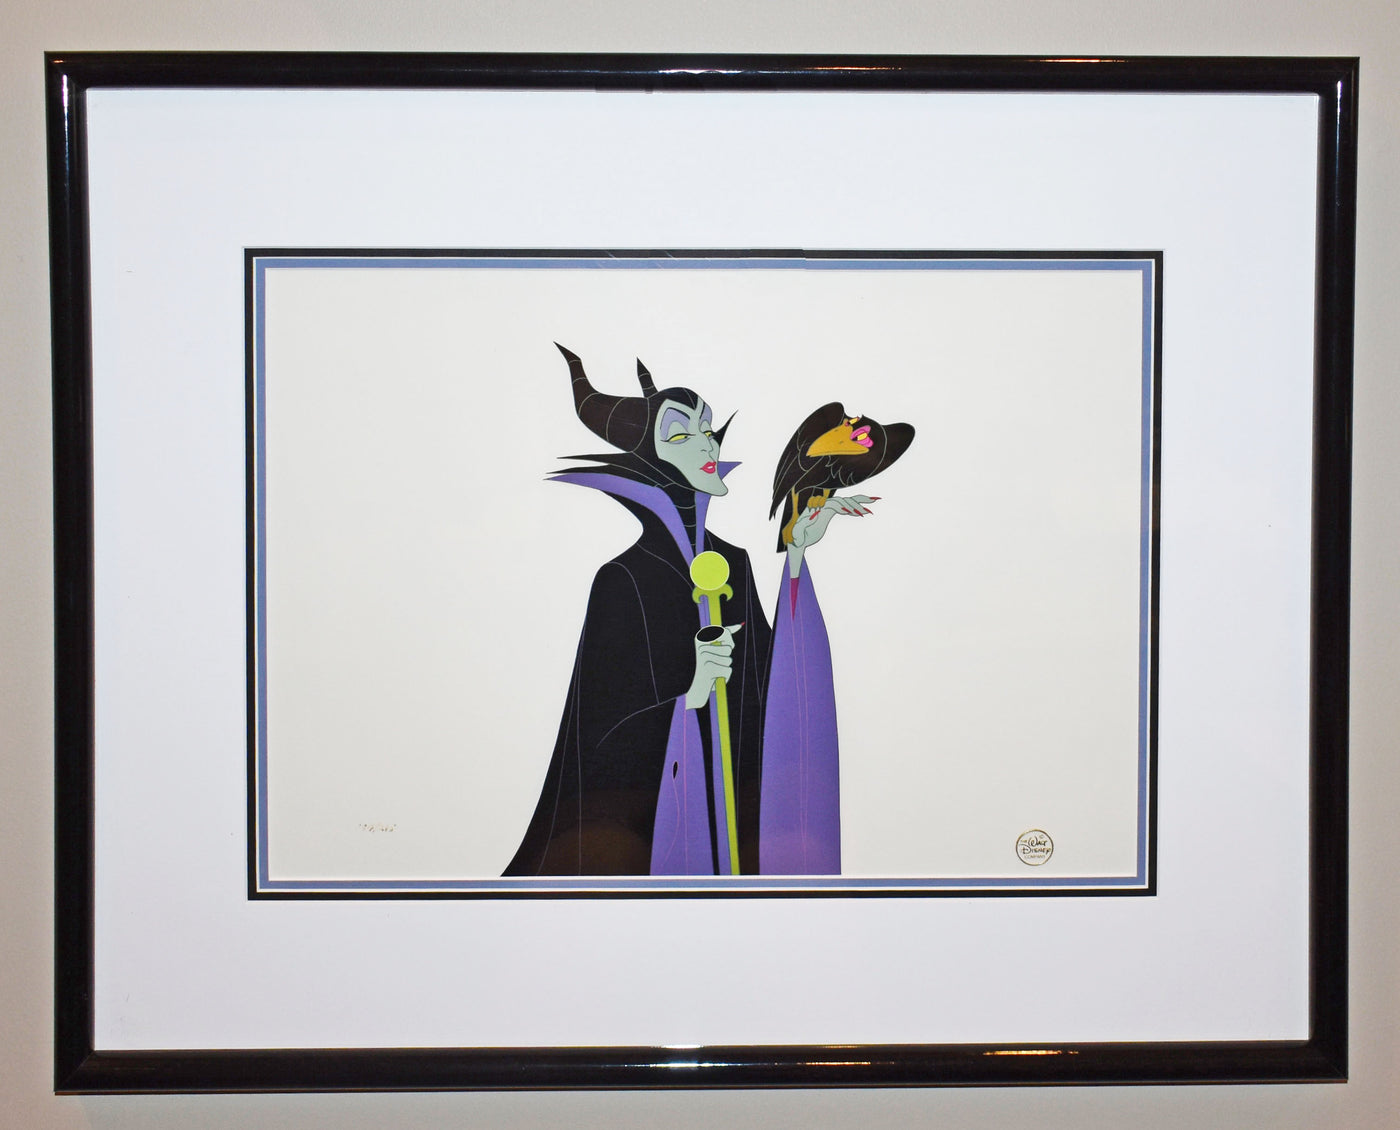 Original Disney Limited Edition Cel featuring Maleficent from Sleeping Beauty